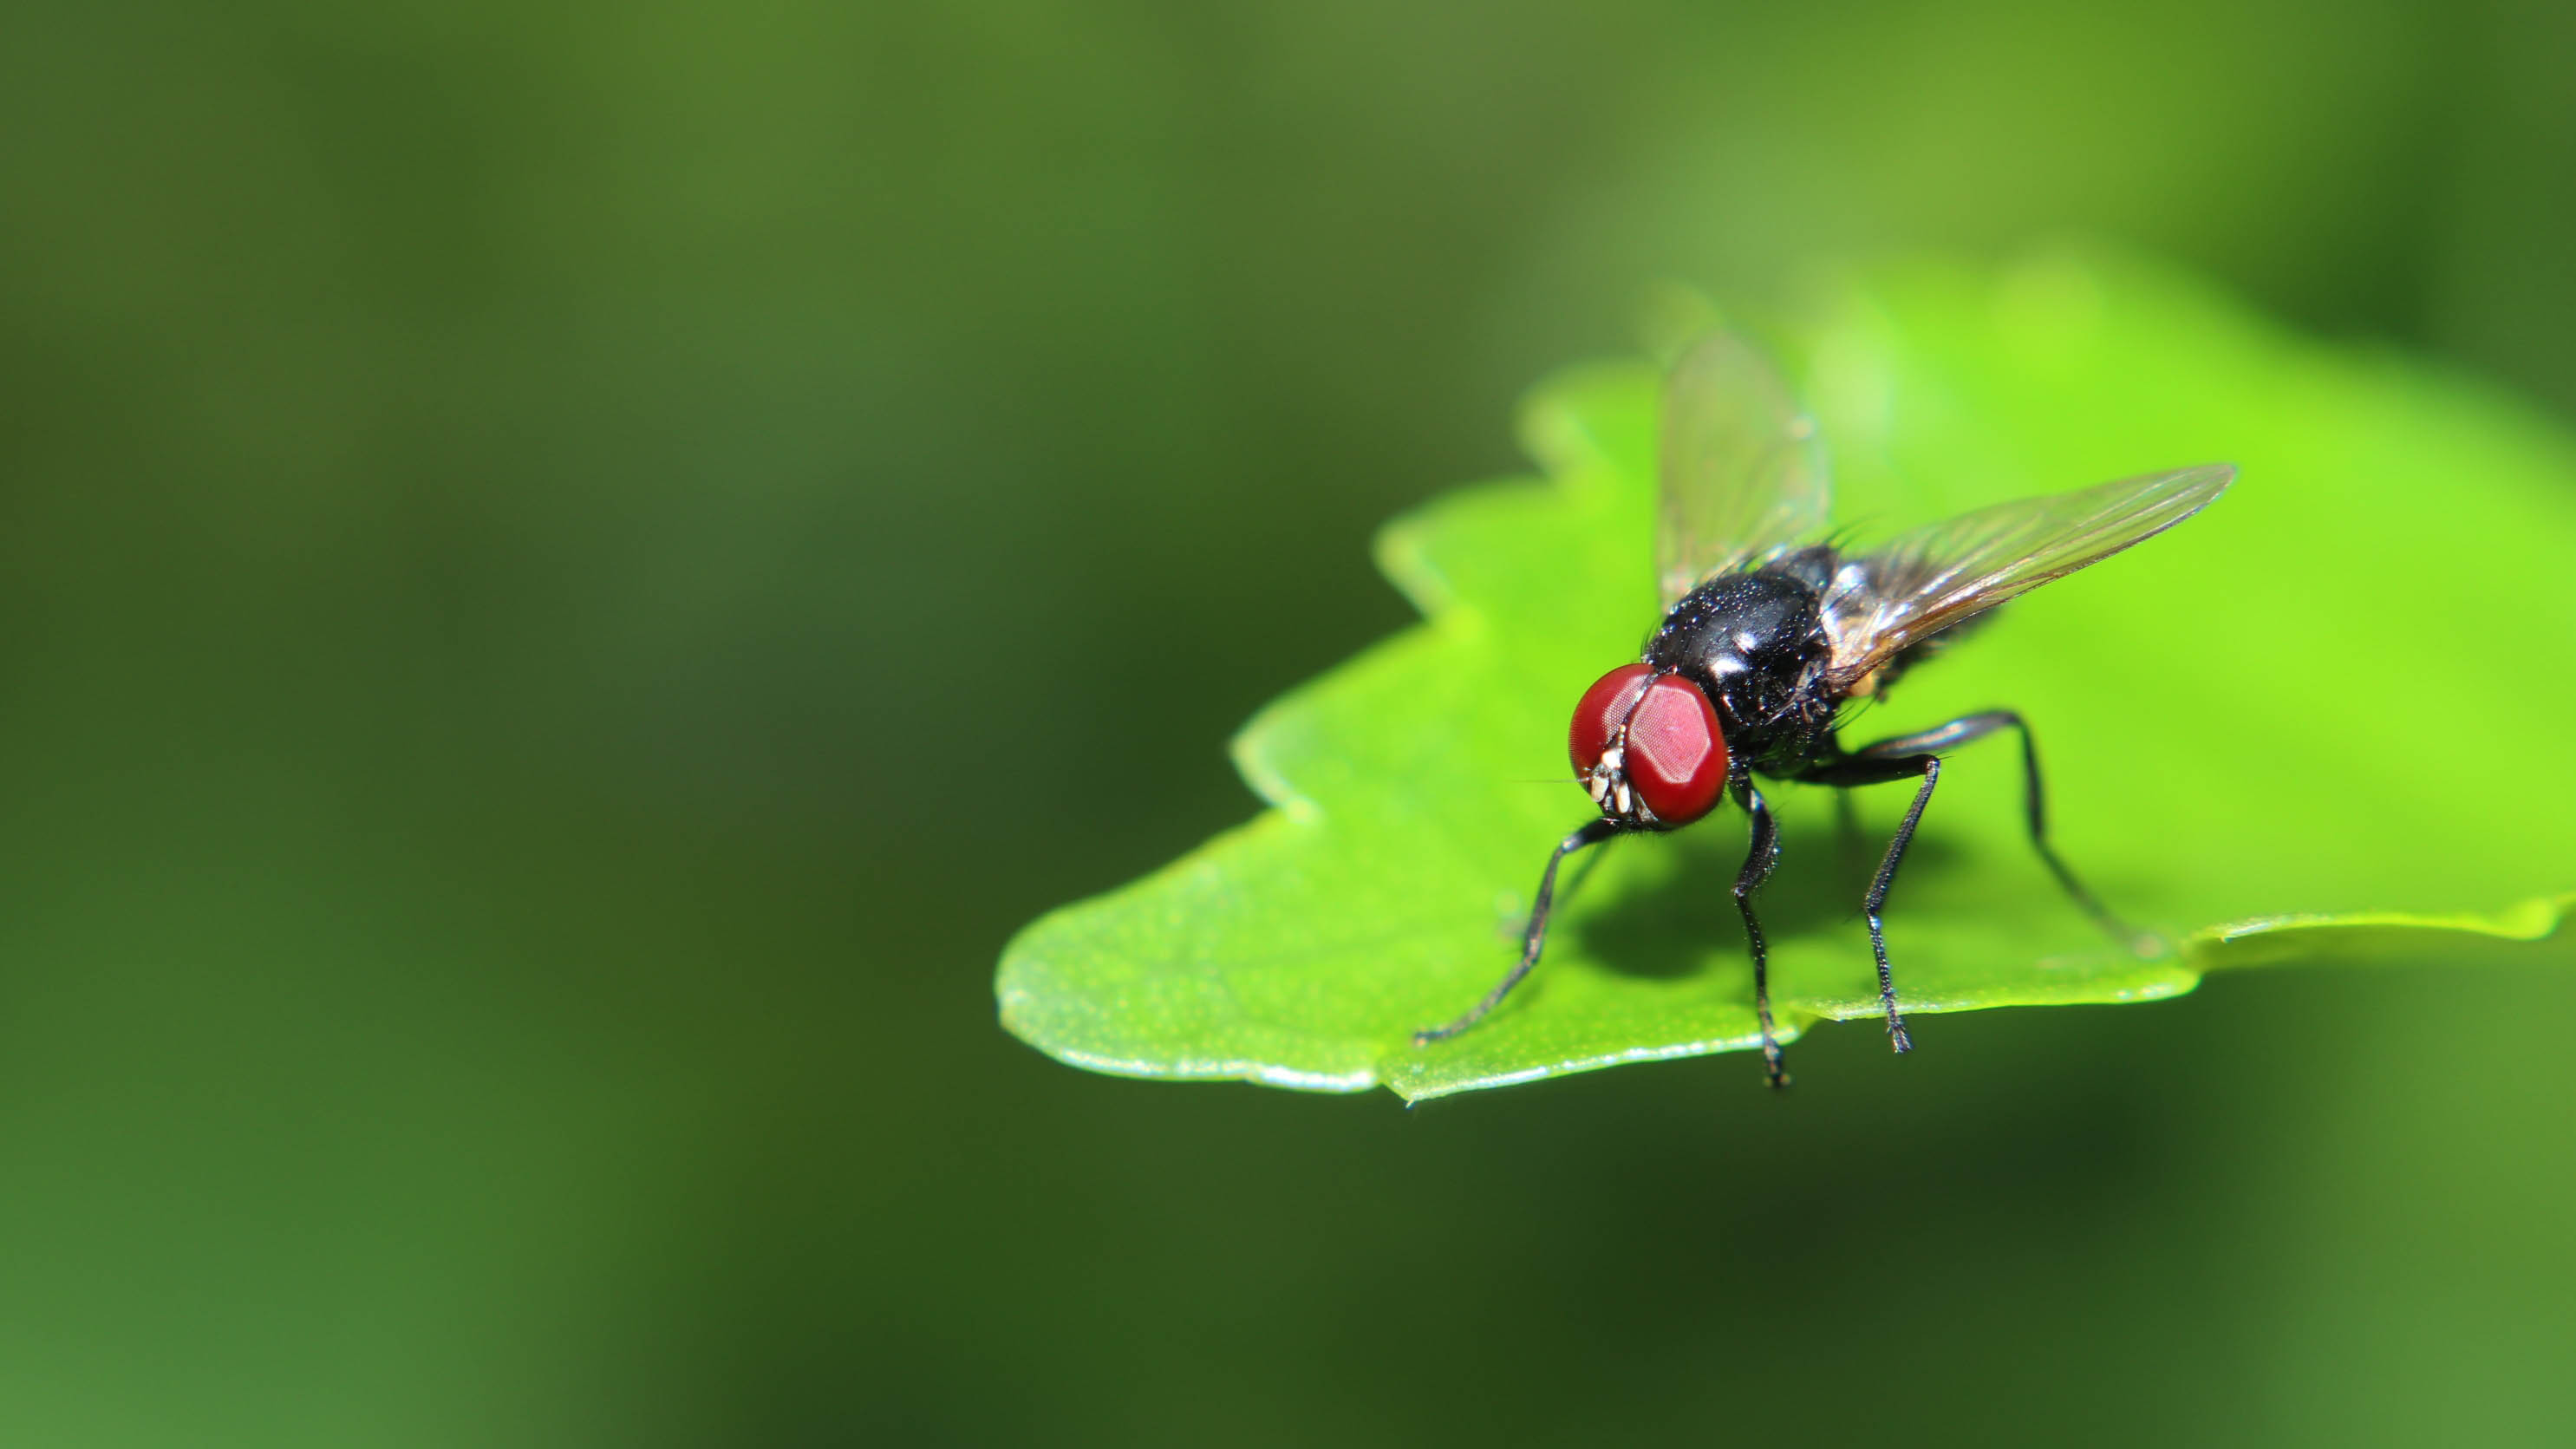 How to get rid of house flies: in your home and garden